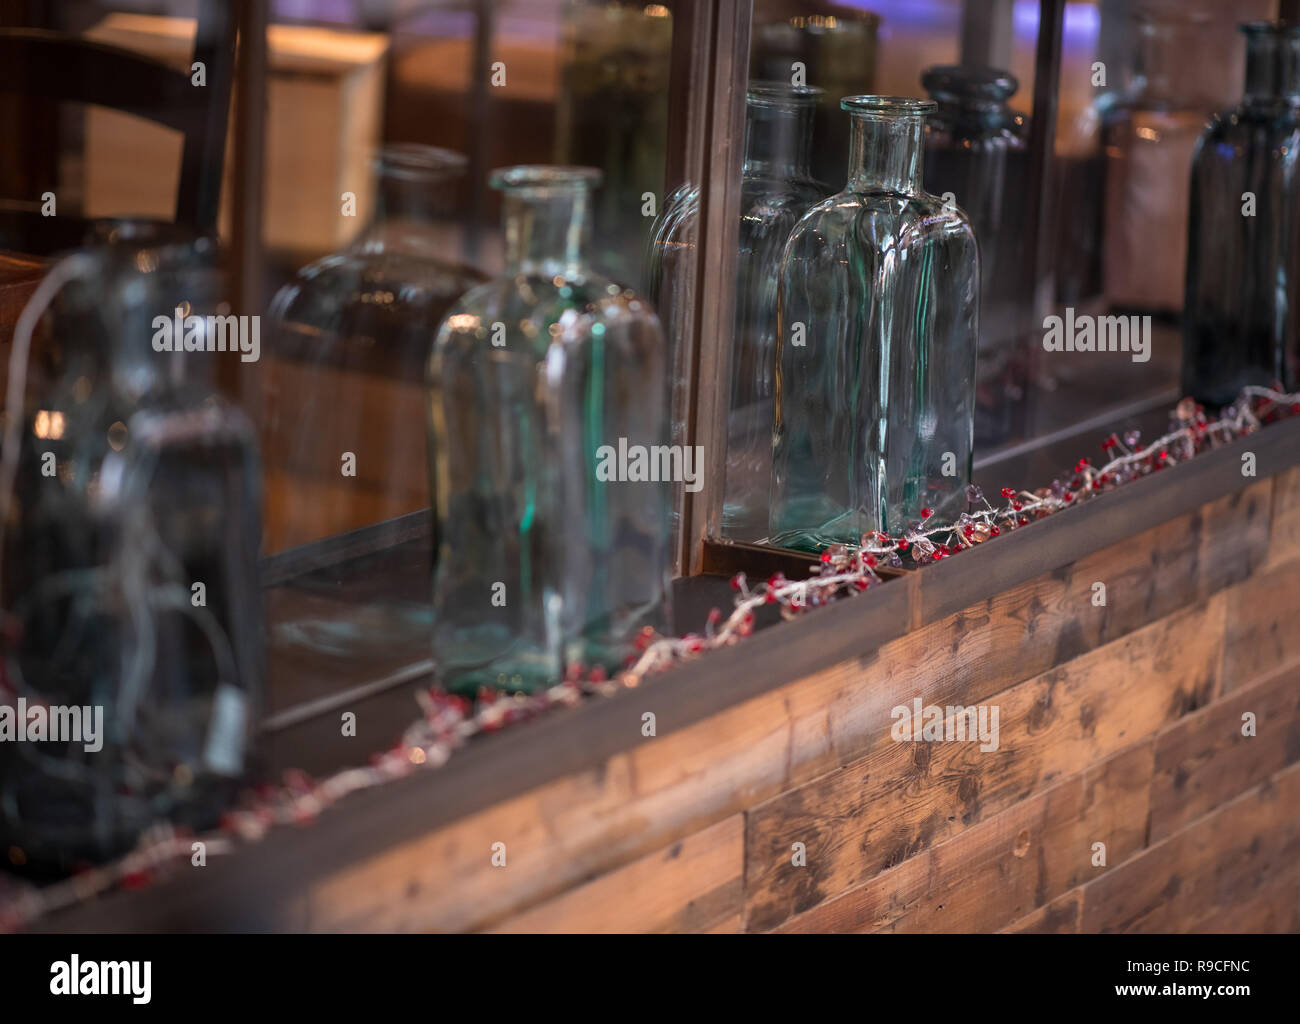 Antique Glass bottles on shelf as ornaments Stock Photo